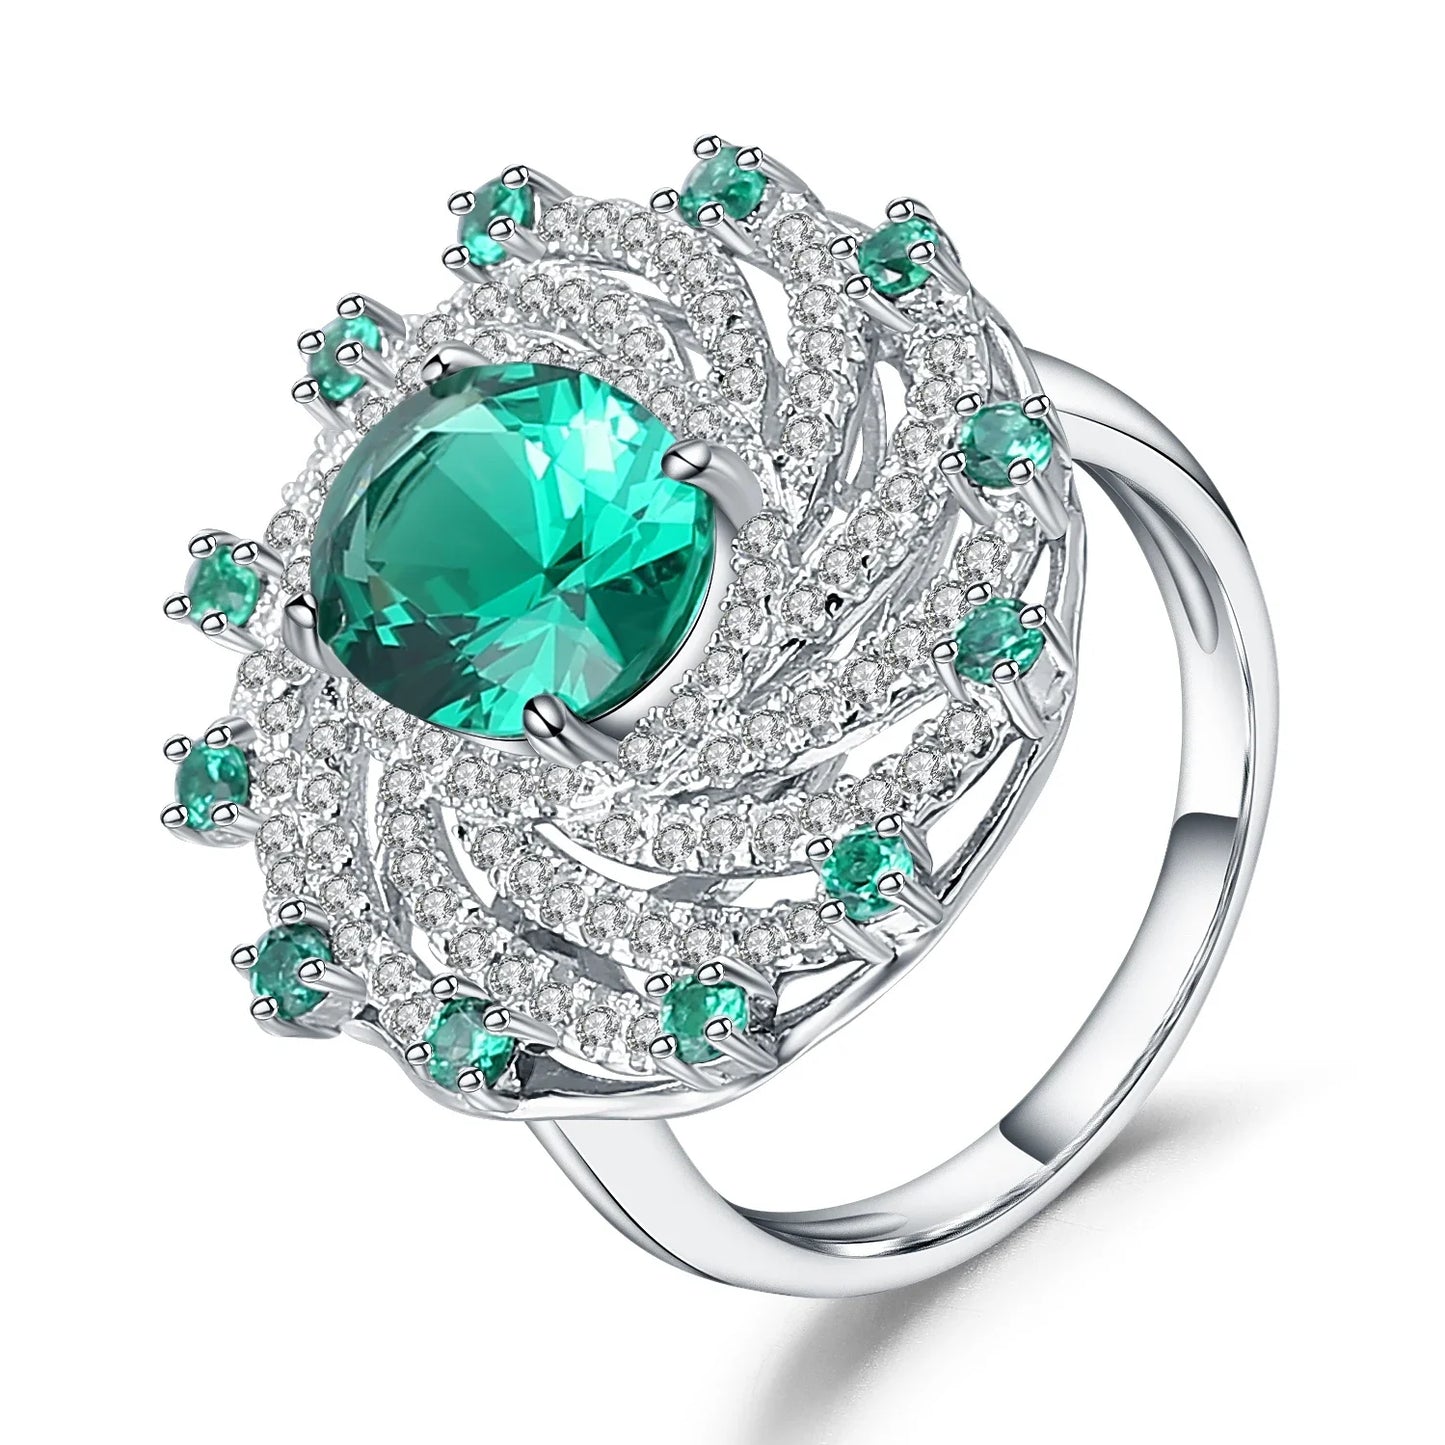 GEM'S BALLET Russian Nano Emerald Vintage Cocktail Ring 925 Sterling Silver Engagement Wedding Rings For Women Fine Jewelry CHINA LabNanoEmerald